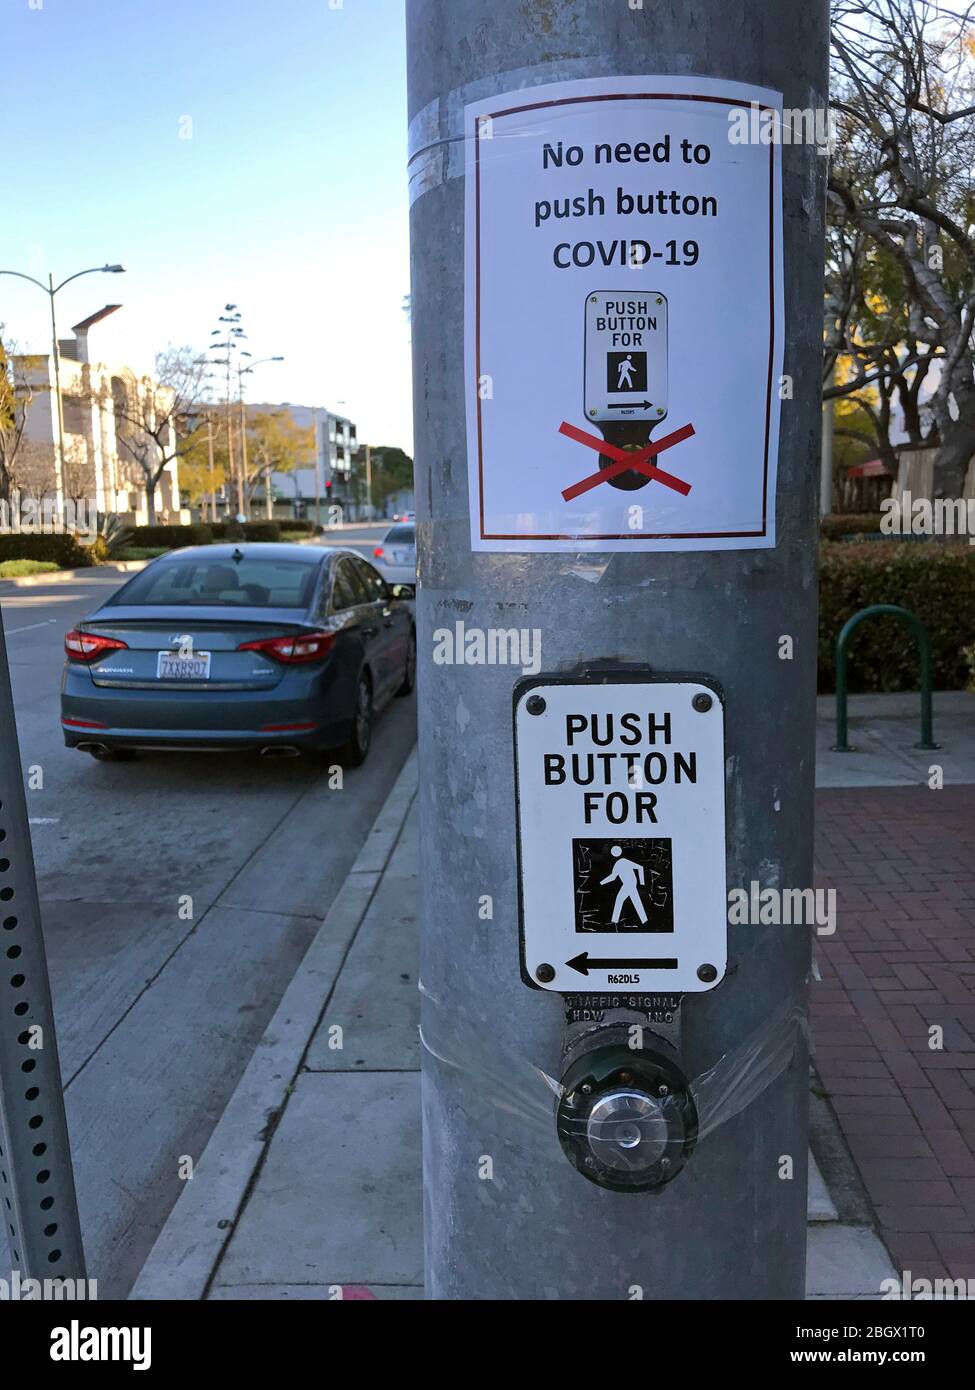 Pedestrian crossing button updated with Covid 19 sign saying no need to push button in Culver City, CA Stock Photo